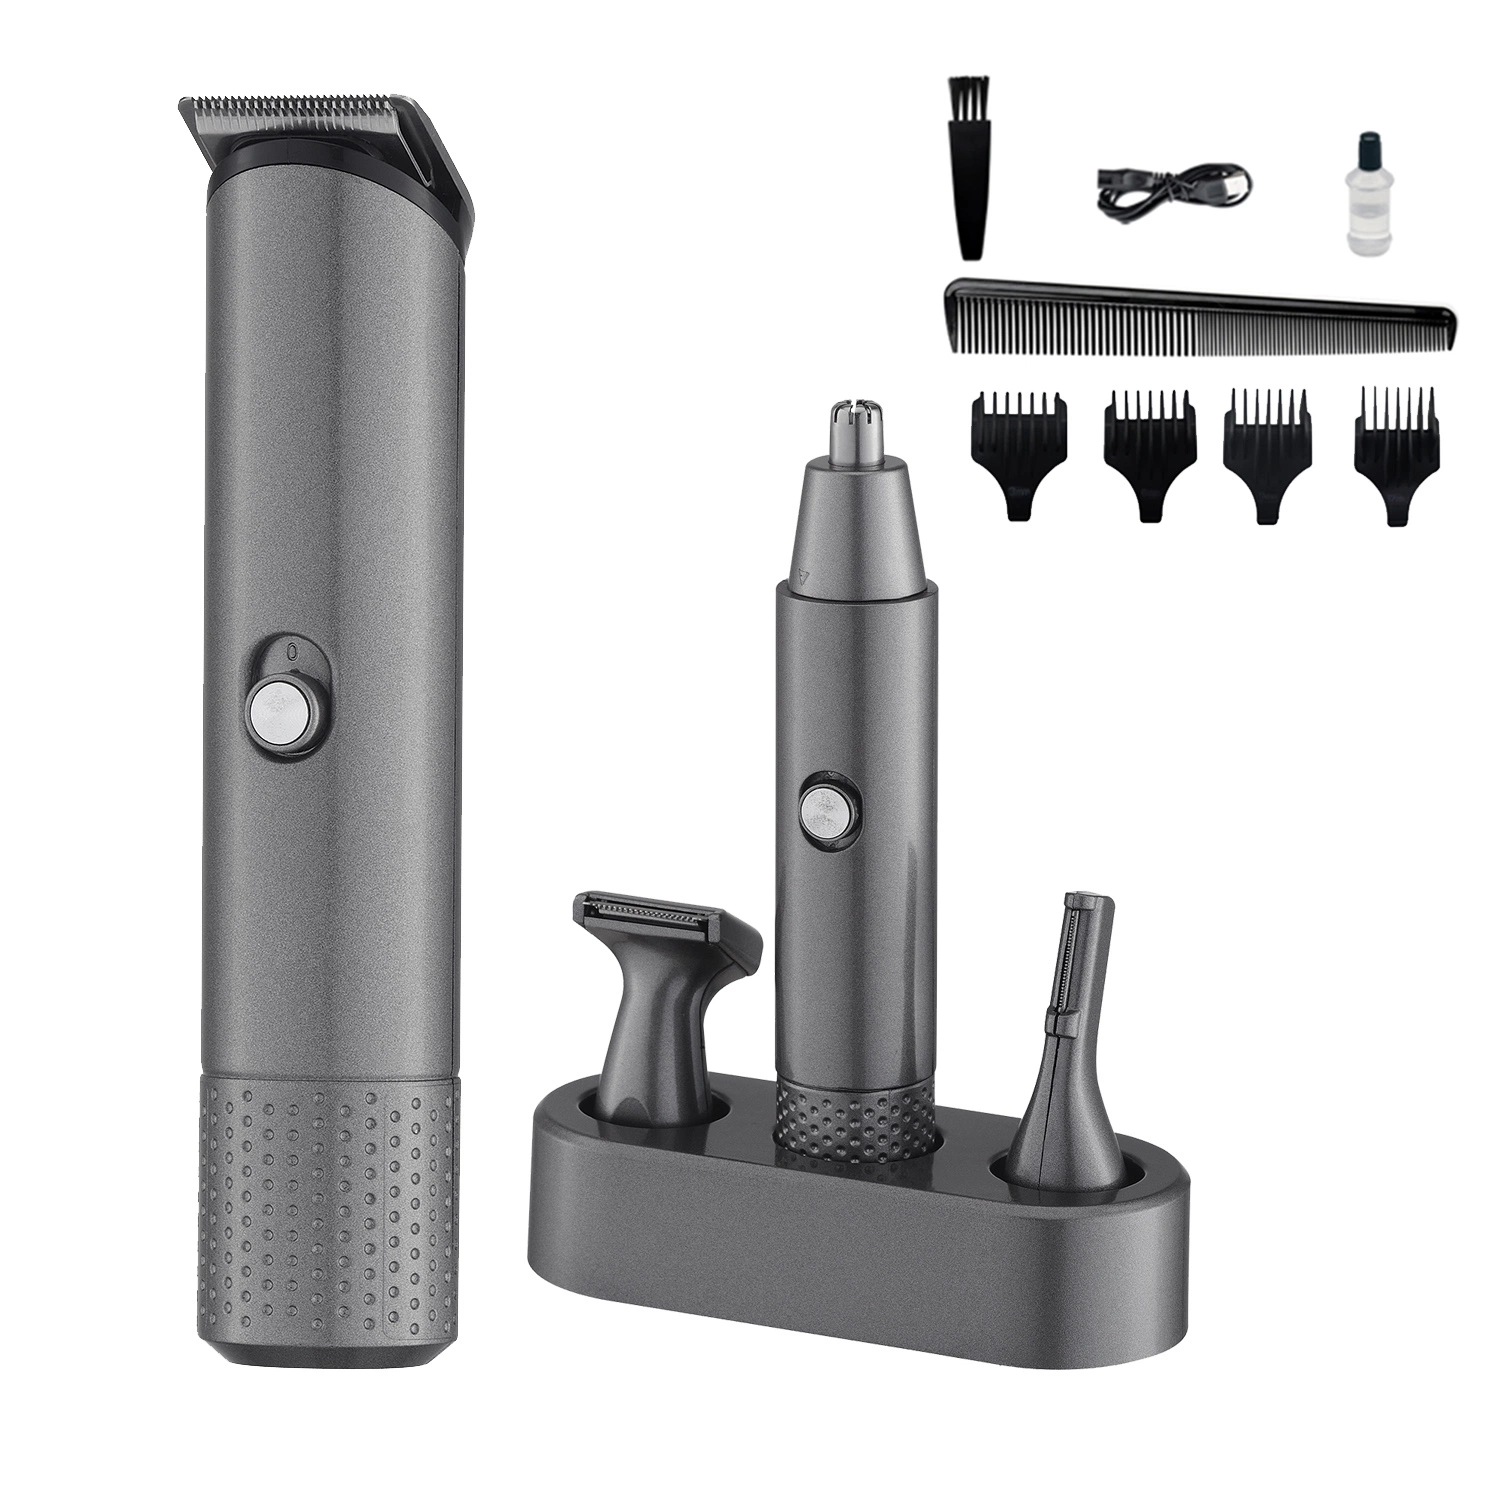 4 in 1 Hair Clippers and Trimmers Set Mini Electric Shaver Pocket Size Waterproof Razor with Comb and Brush